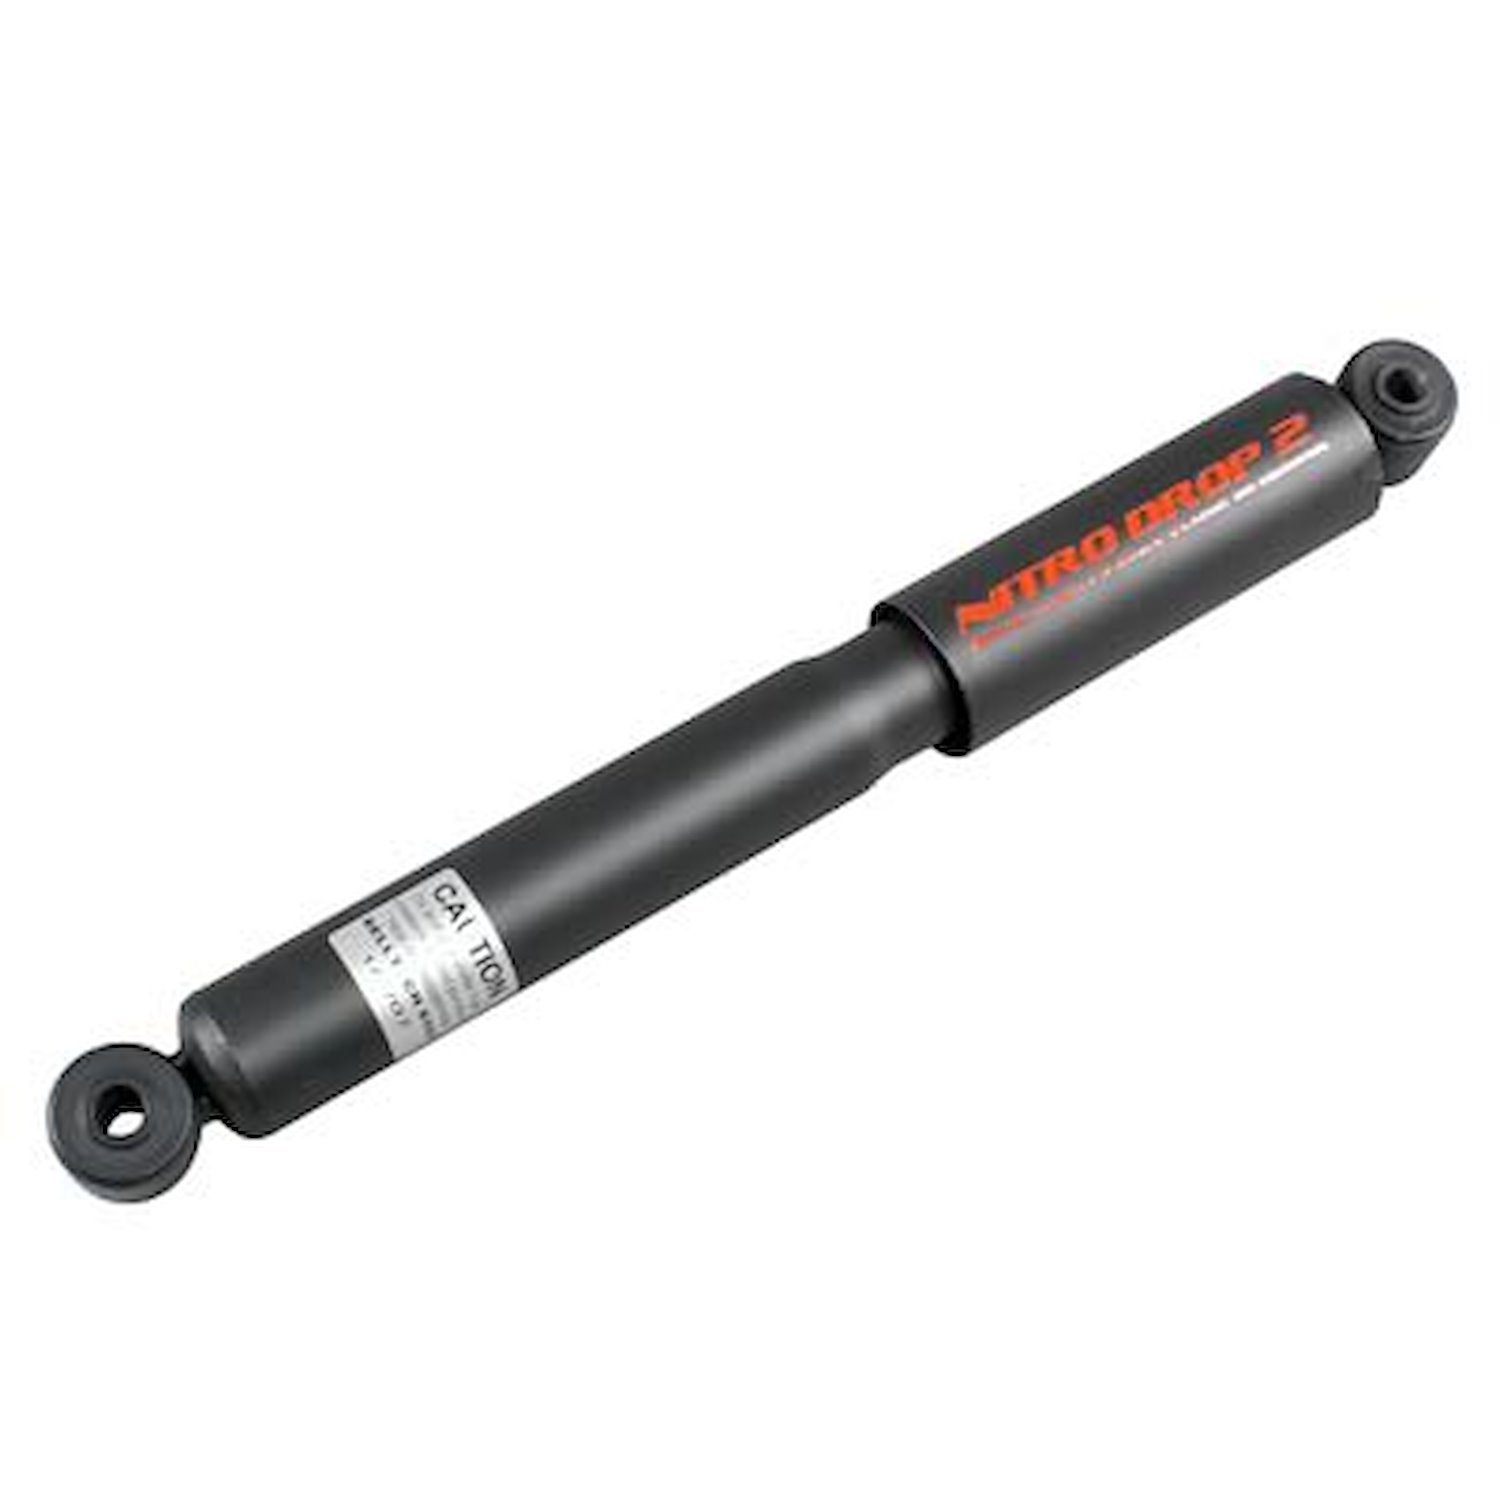 Street Performance Shock Set includes (2) 146-25005 Front Shocks and (2) 146-2210IF Rear Shocks